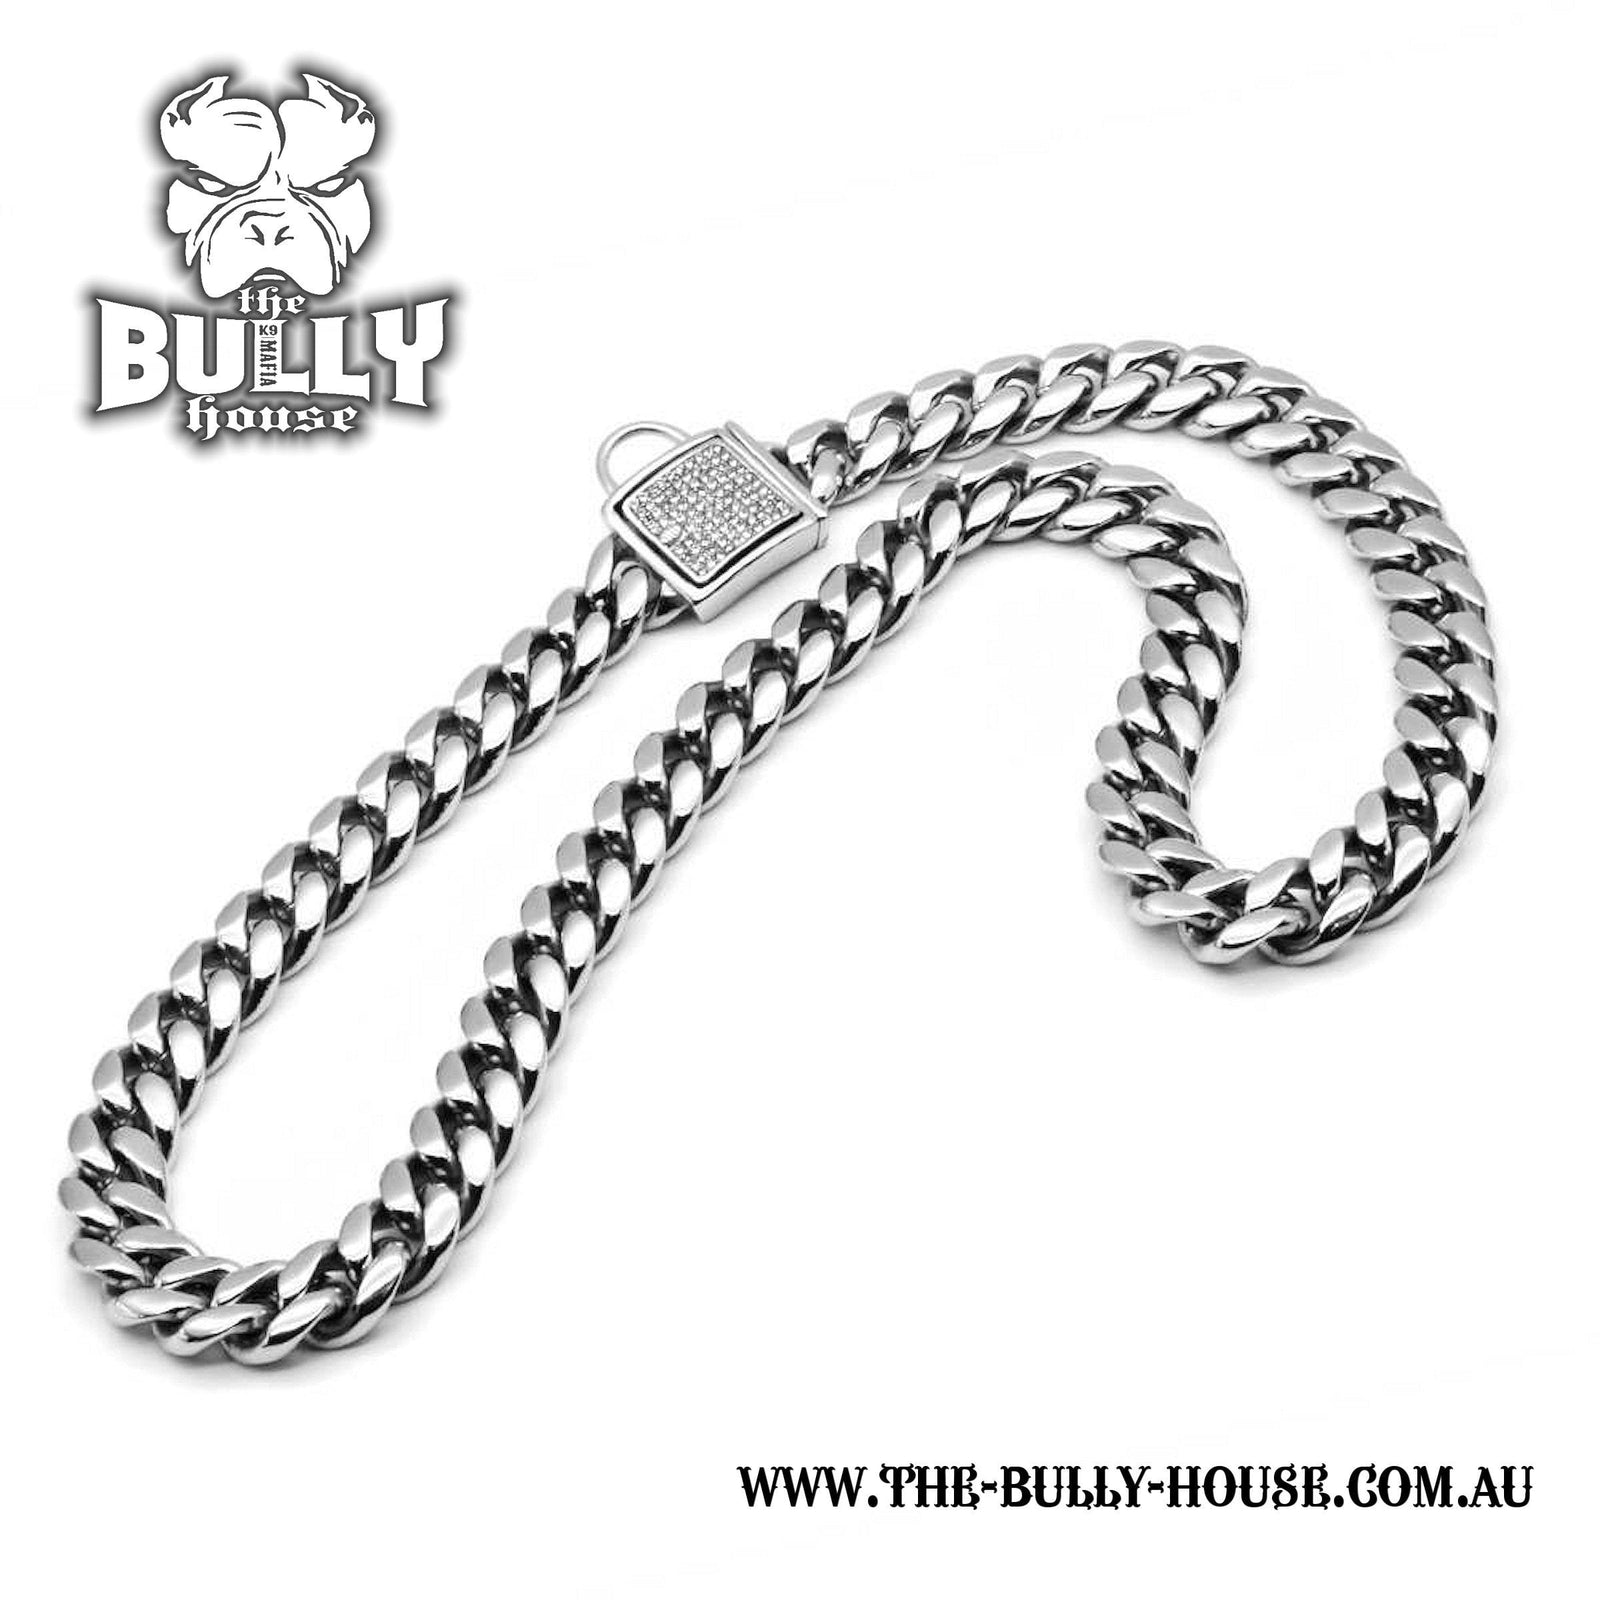 (Pre Order Now - Arriving approx end of DEC) The Bully House "MIAMI Diamond Padlock" - SILVER 14mm Wide -